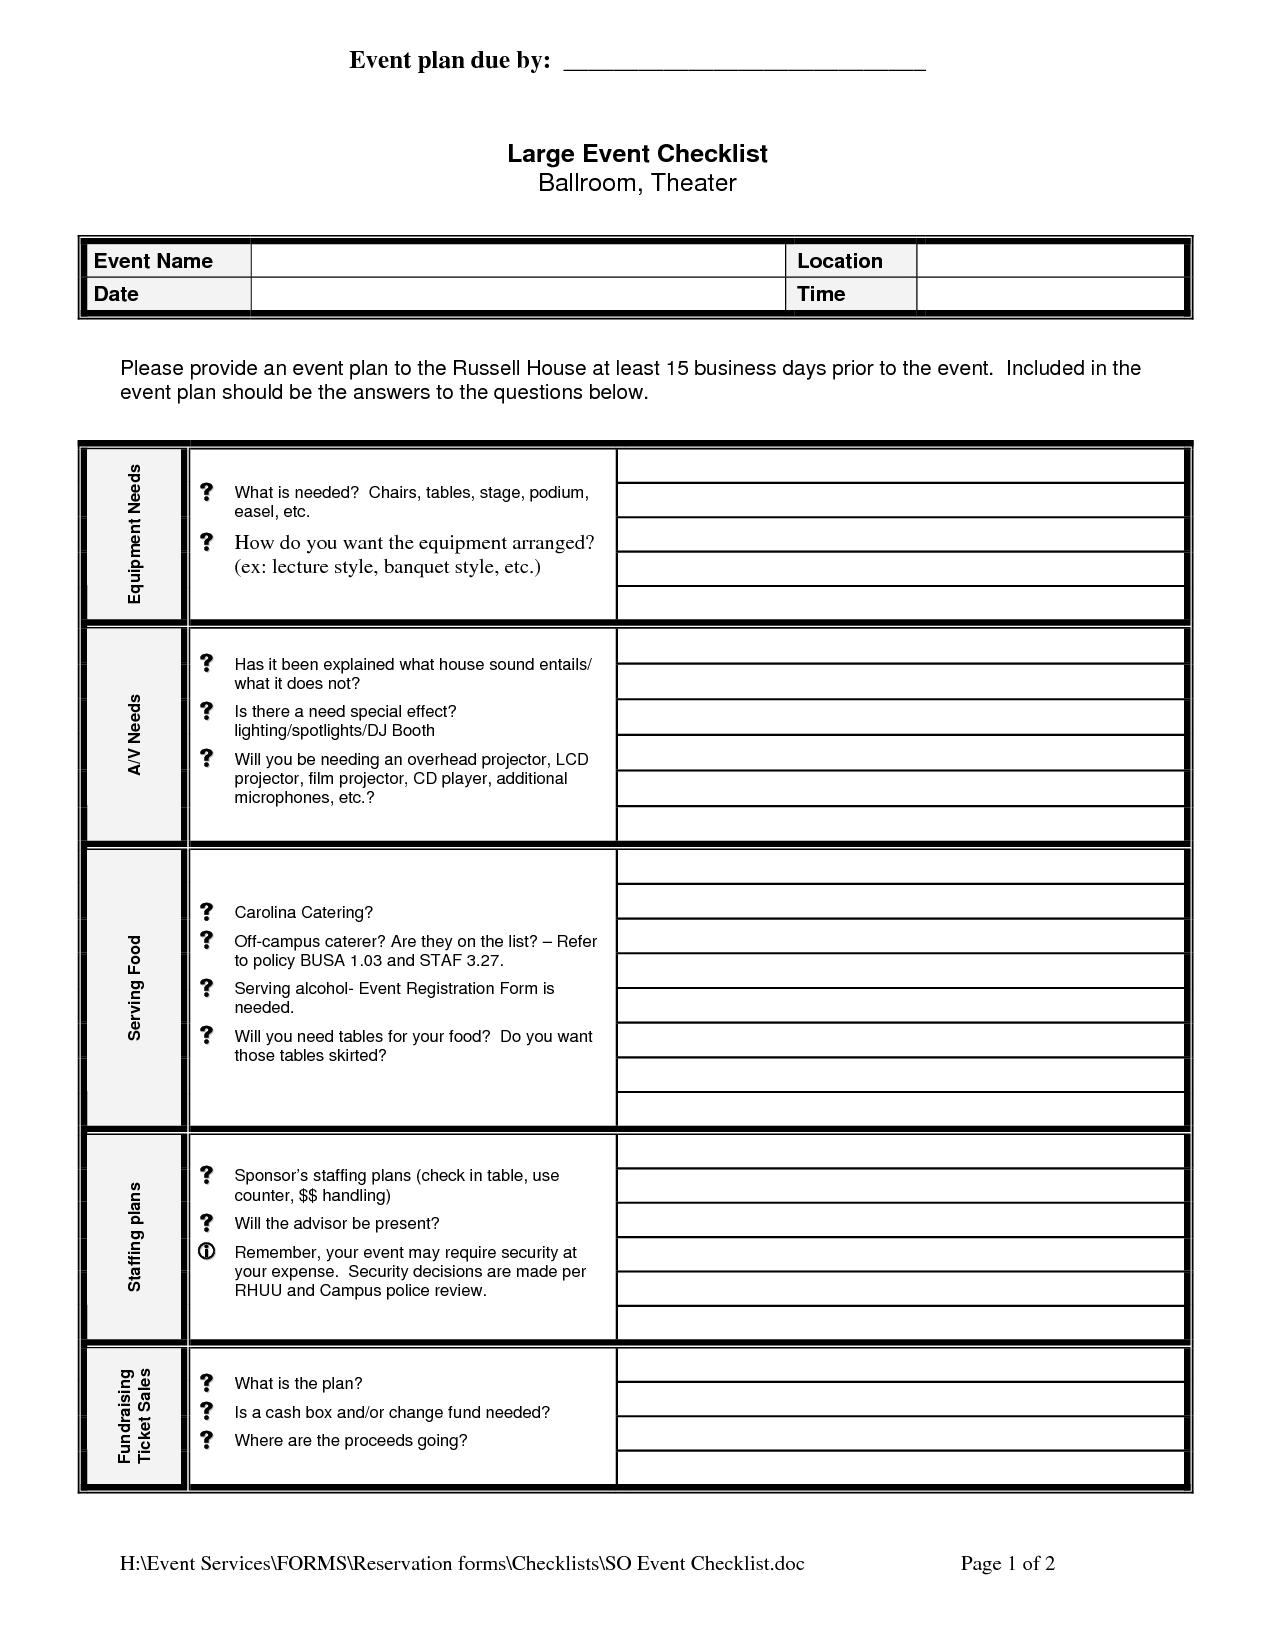 How To Plan An Event Template - arxiusarquitectura Pertaining To Meeting Planning Checklist Template With Meeting Planning Checklist Template